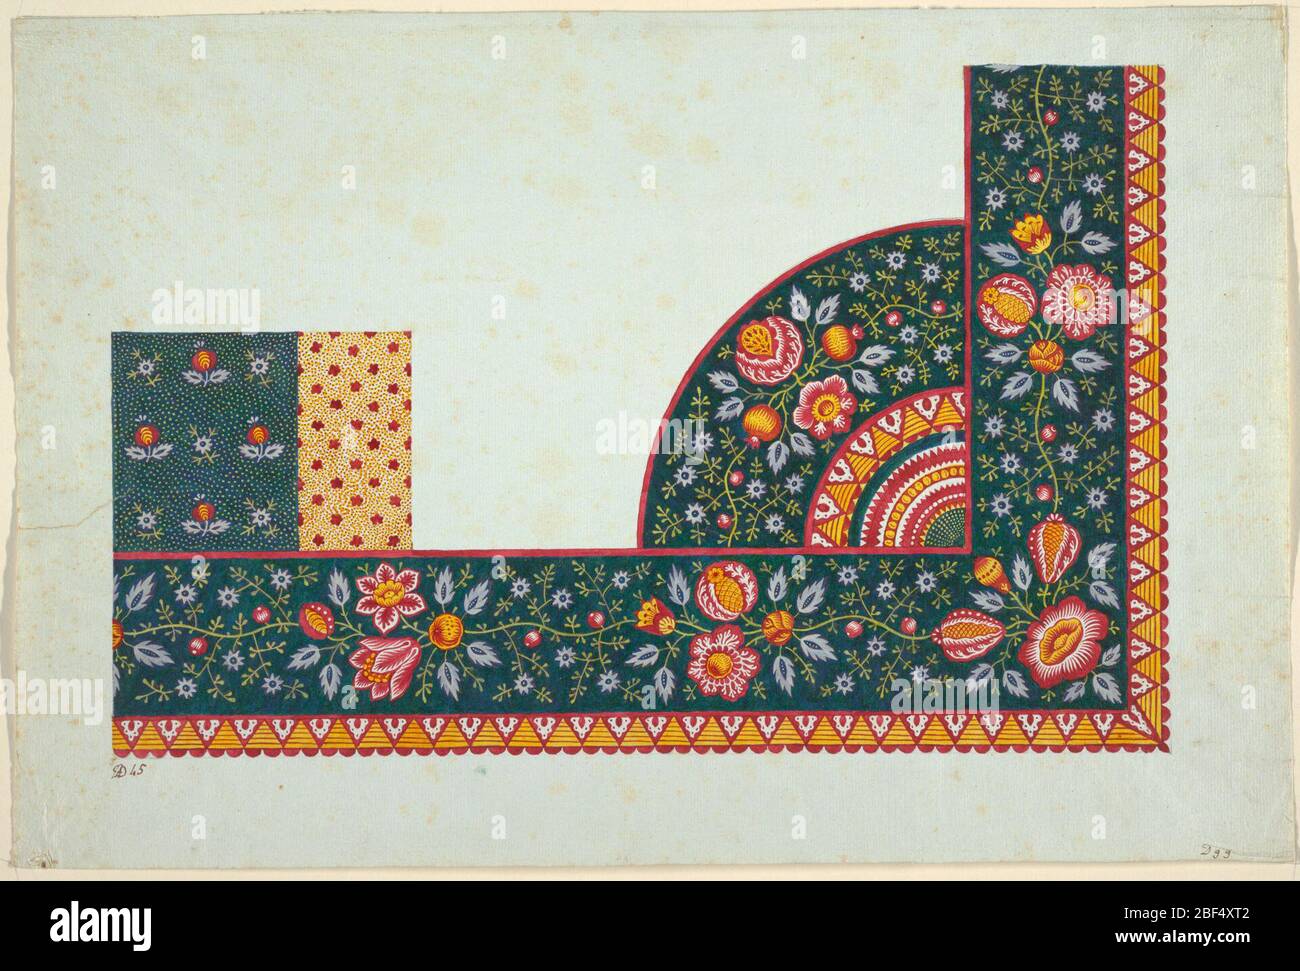 Drawing. Corner border design, red, yellow and white flowers with violet leaves on dark green background. Scalloped red edge on right and lower borders. Stock Photo